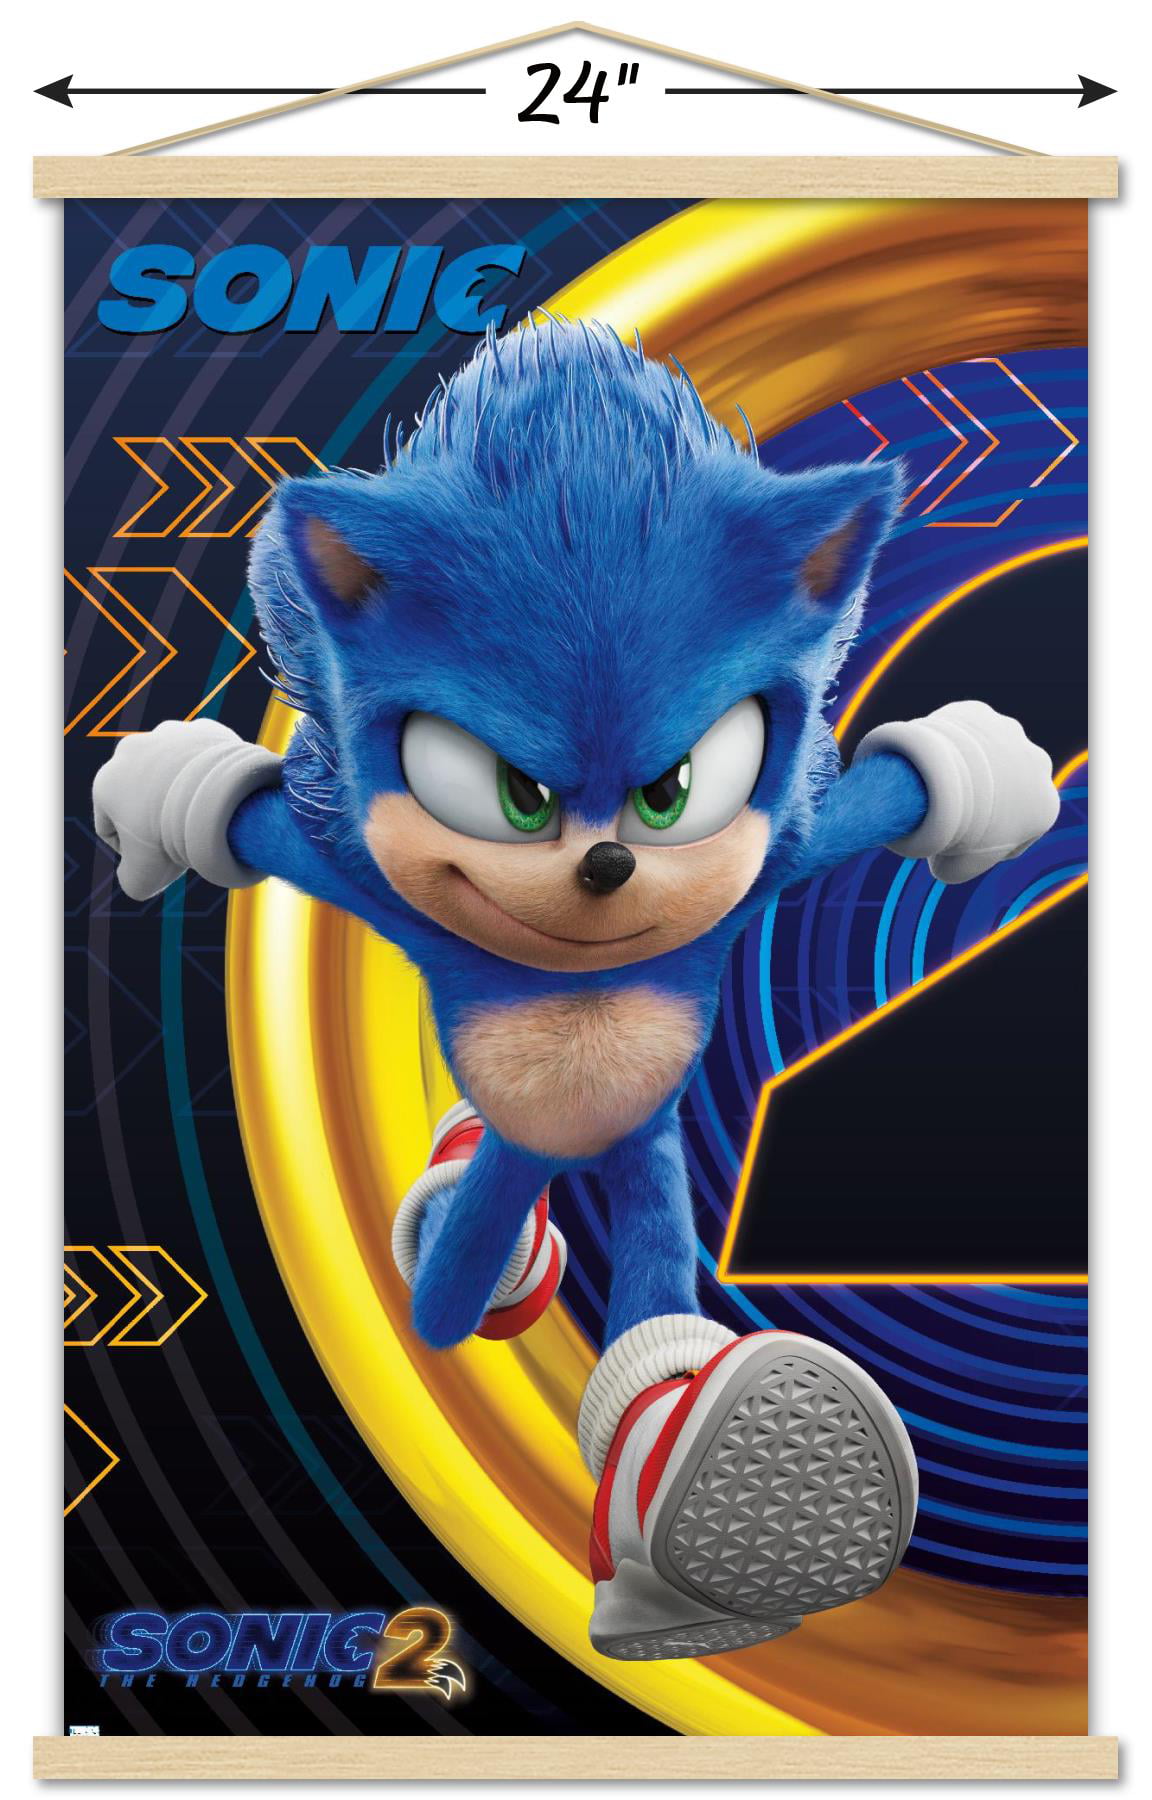 Is Shadow the Hedgehog affected by the white space in Sonic